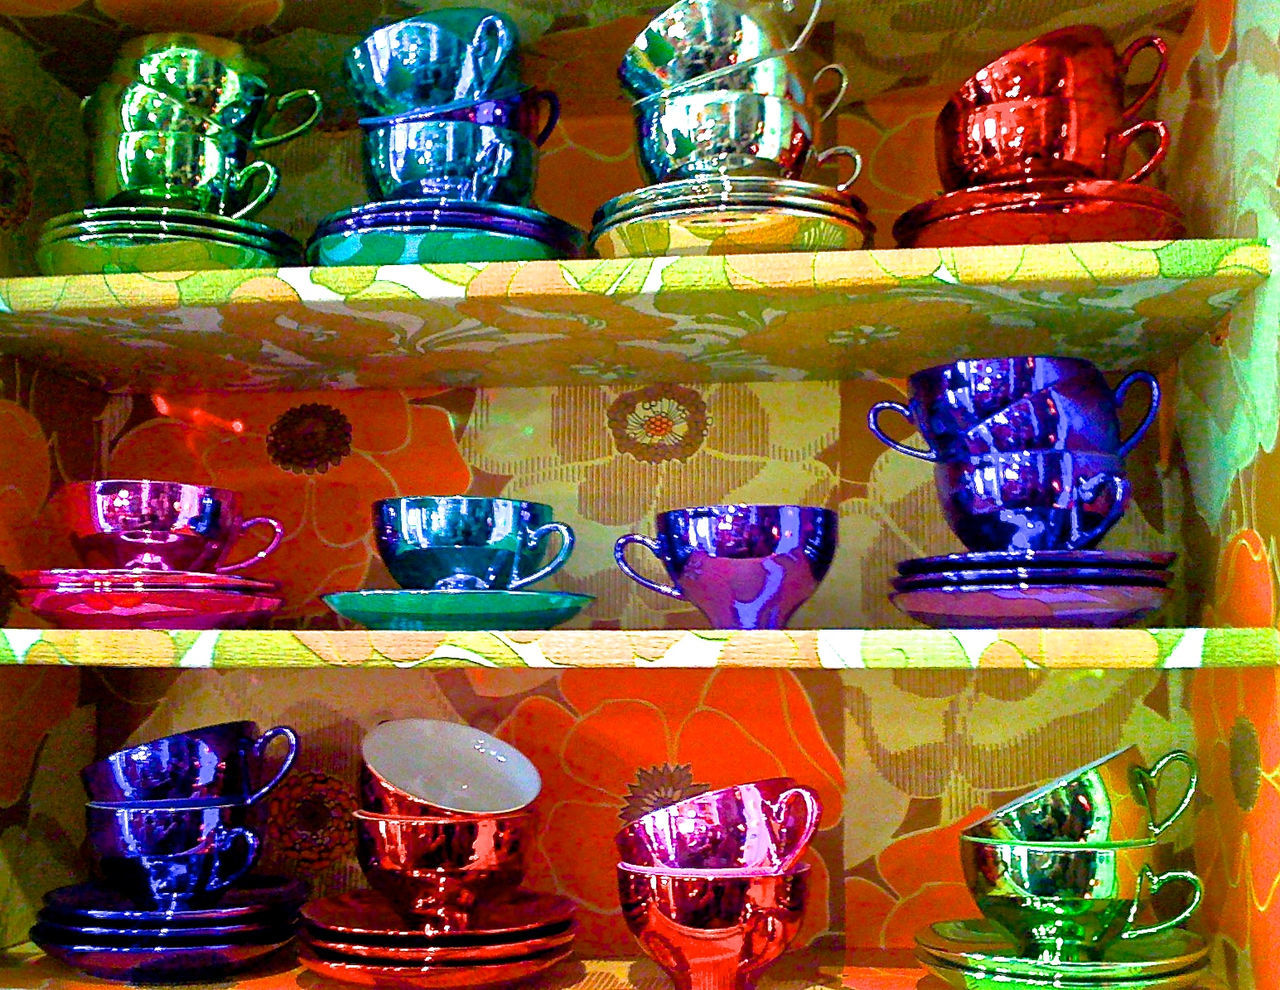 CLOSE-UP OF OBJECTS FOR SALE AT MARKET